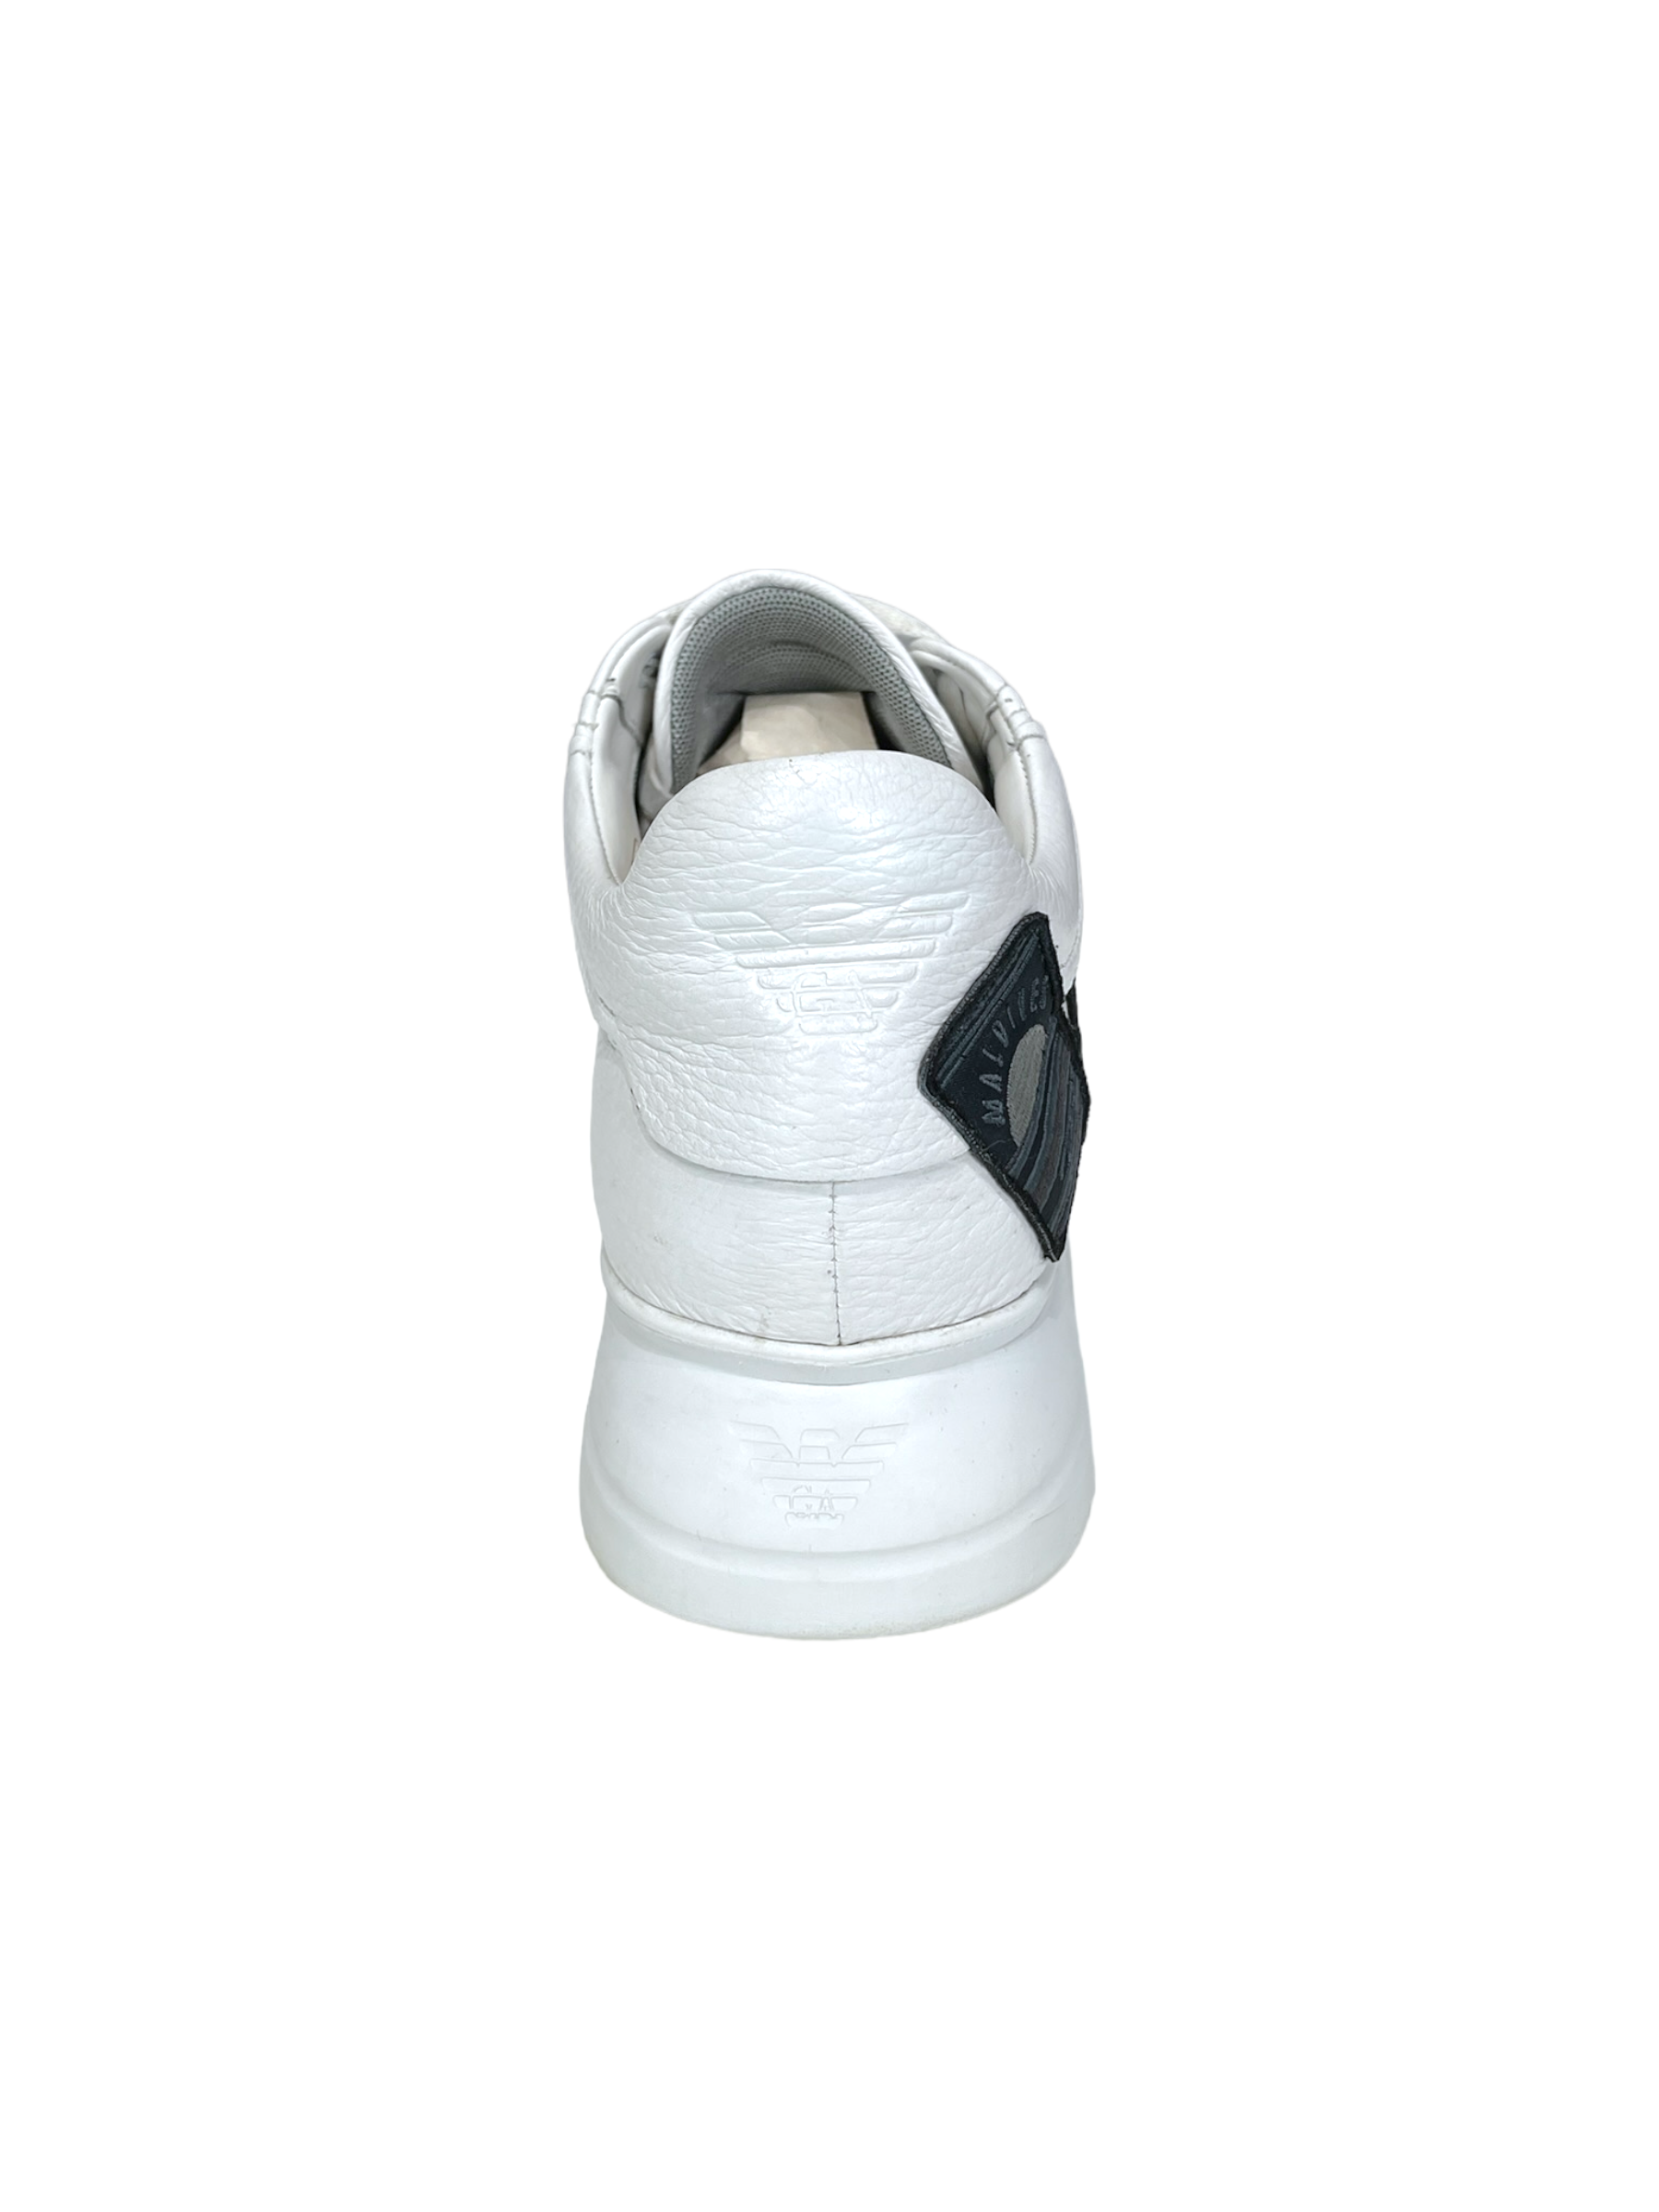 Emporio Armani White Leather Patch Casual Sneakers 6- Genuine Design Luxury Consignment Calgary, Alberta, Canada New and Pre-Owned Clothing, Shoes, Accessories.